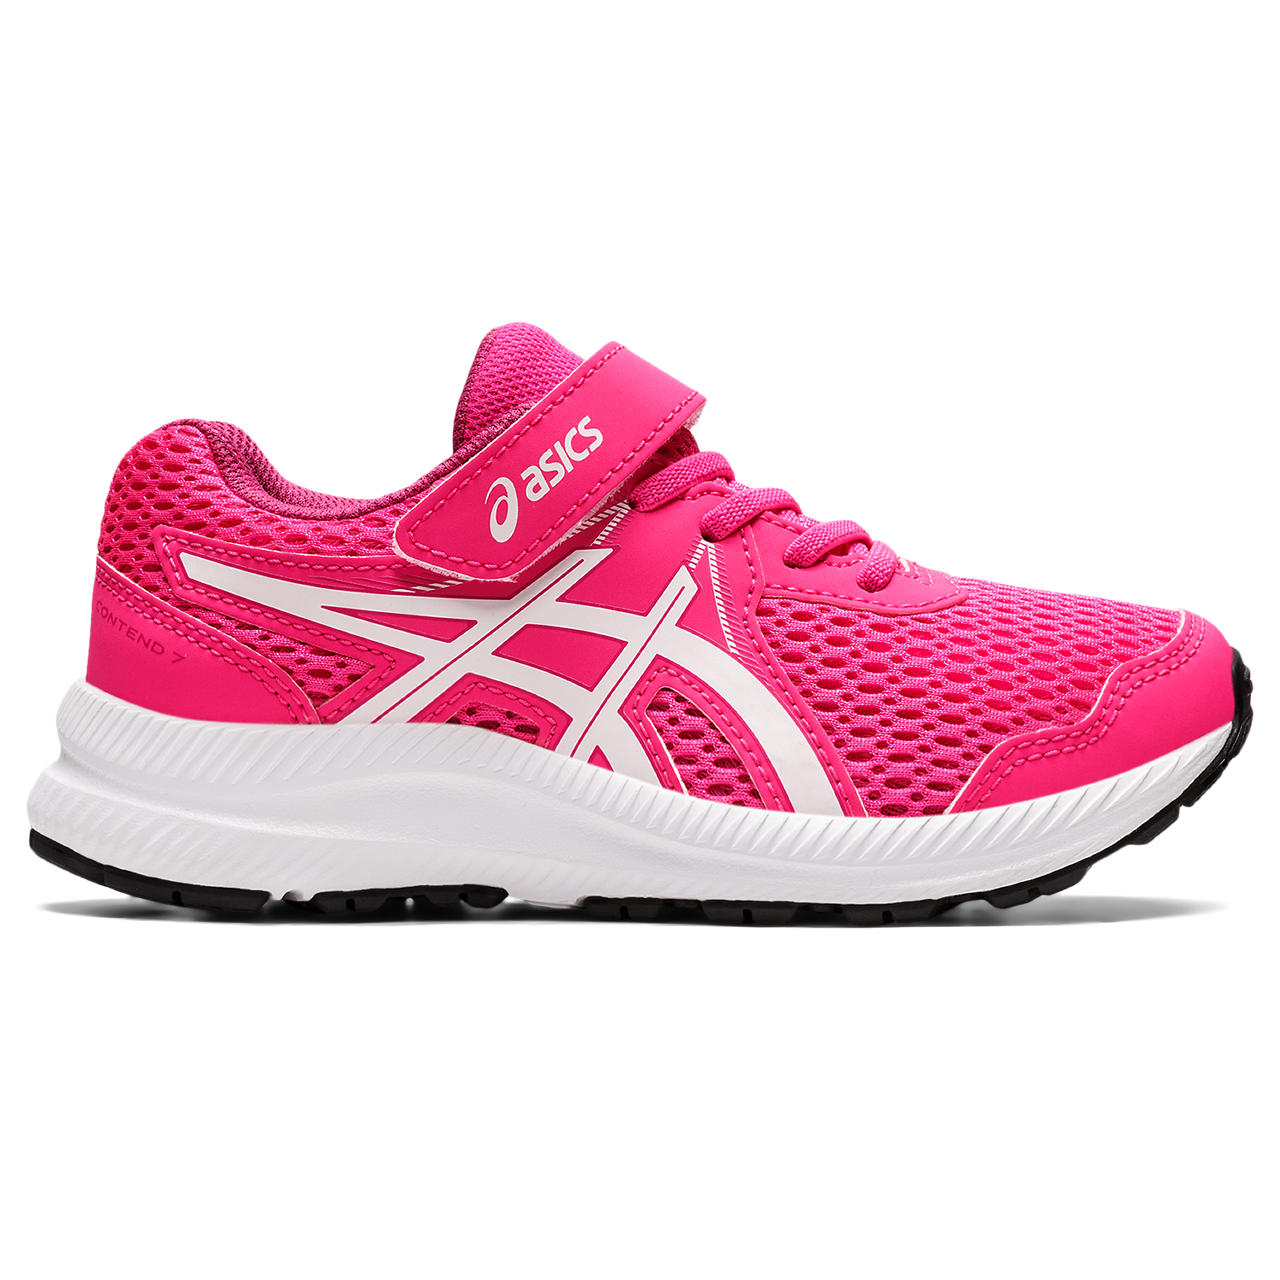 ASICS CONTEND 7 PS, PINK GLO/WHITE, swatch